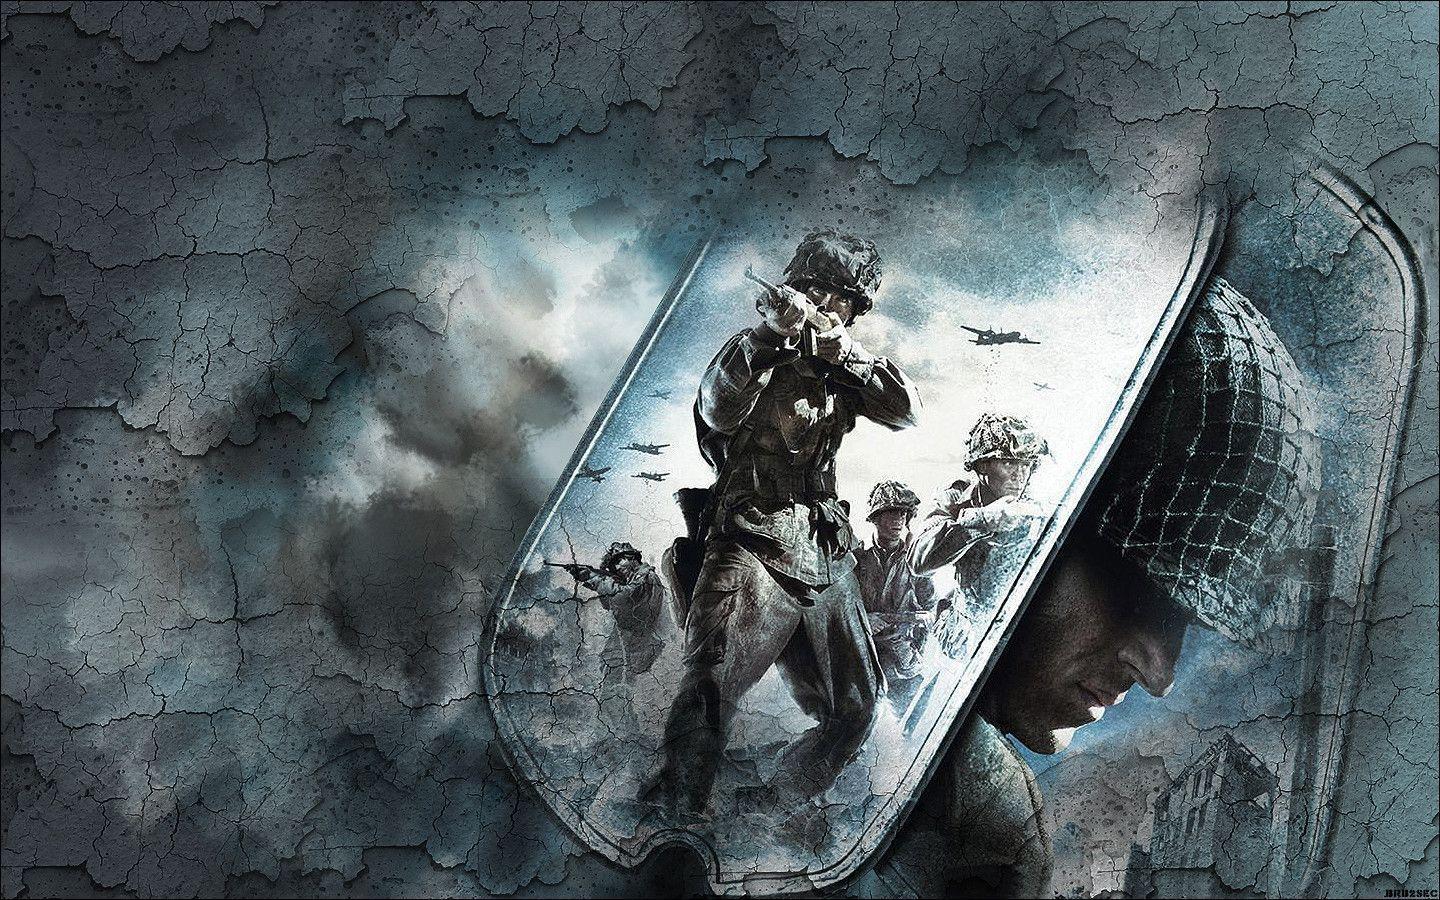 Medal of honor backgrounds by brb2sec